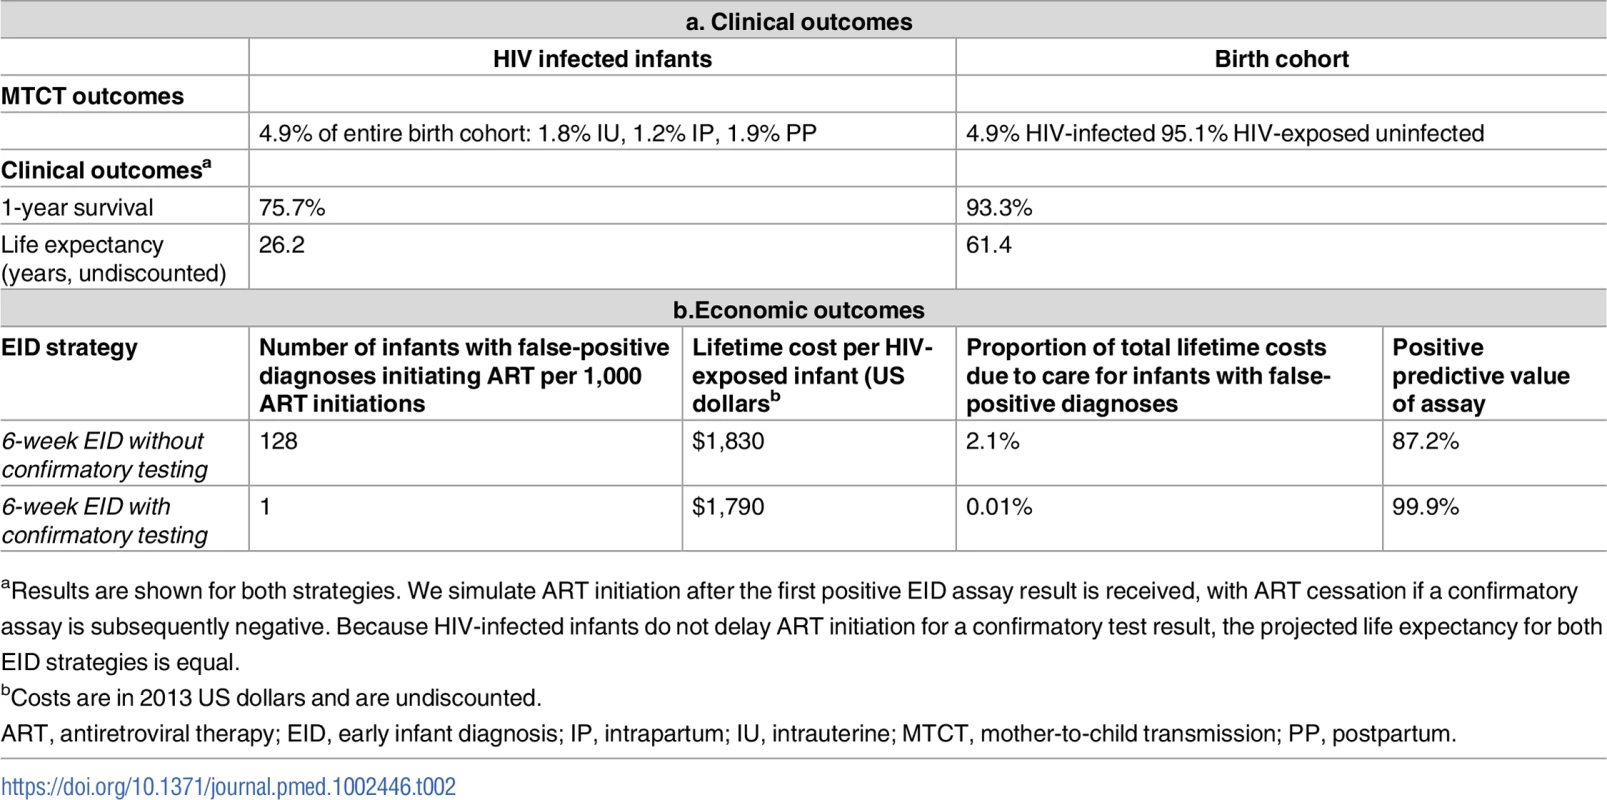 Base-case model results: Early infant HIV diagnosis testing at 6 weeks in South Africa with and without confirmatory testing.